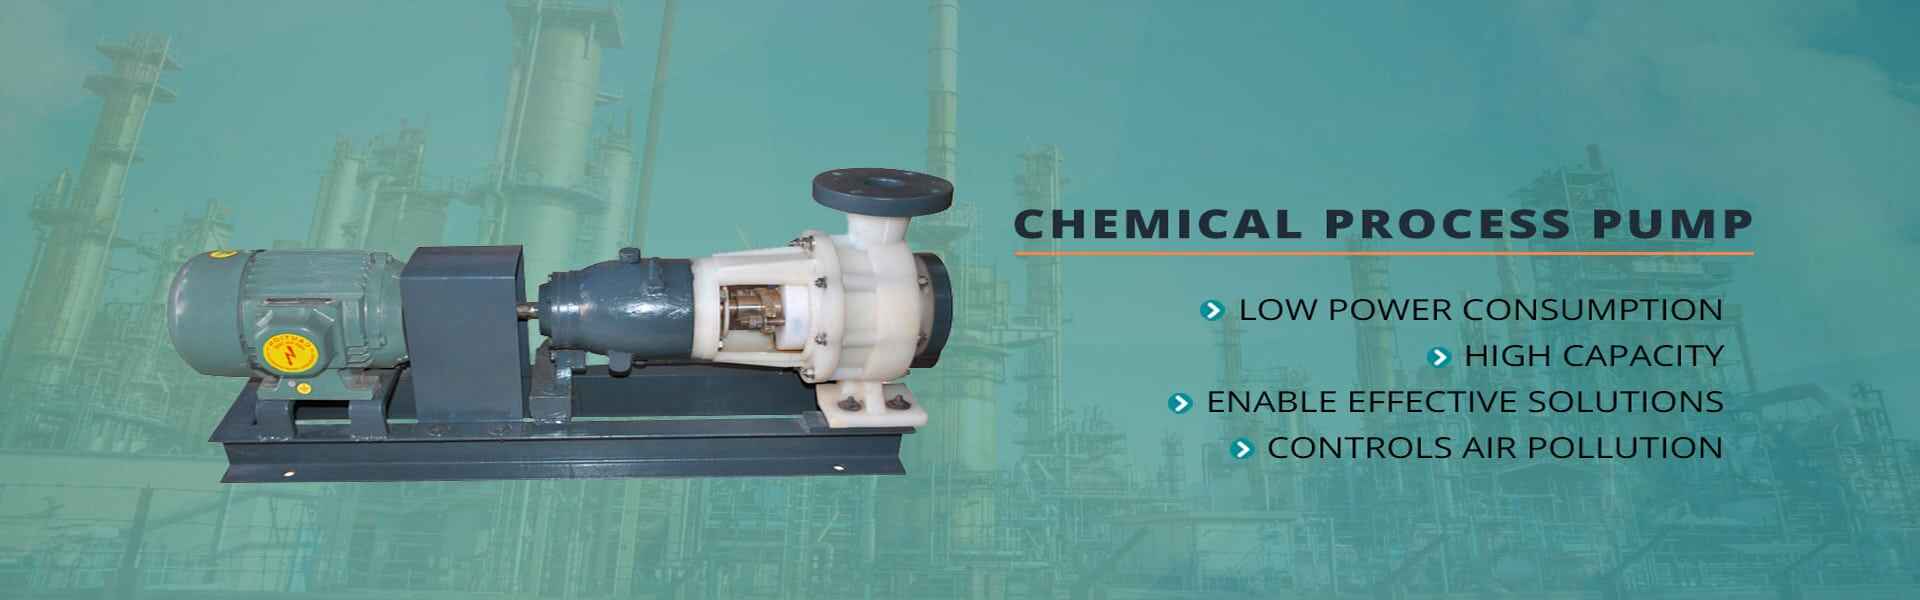 chemical-process-pump Home page banner